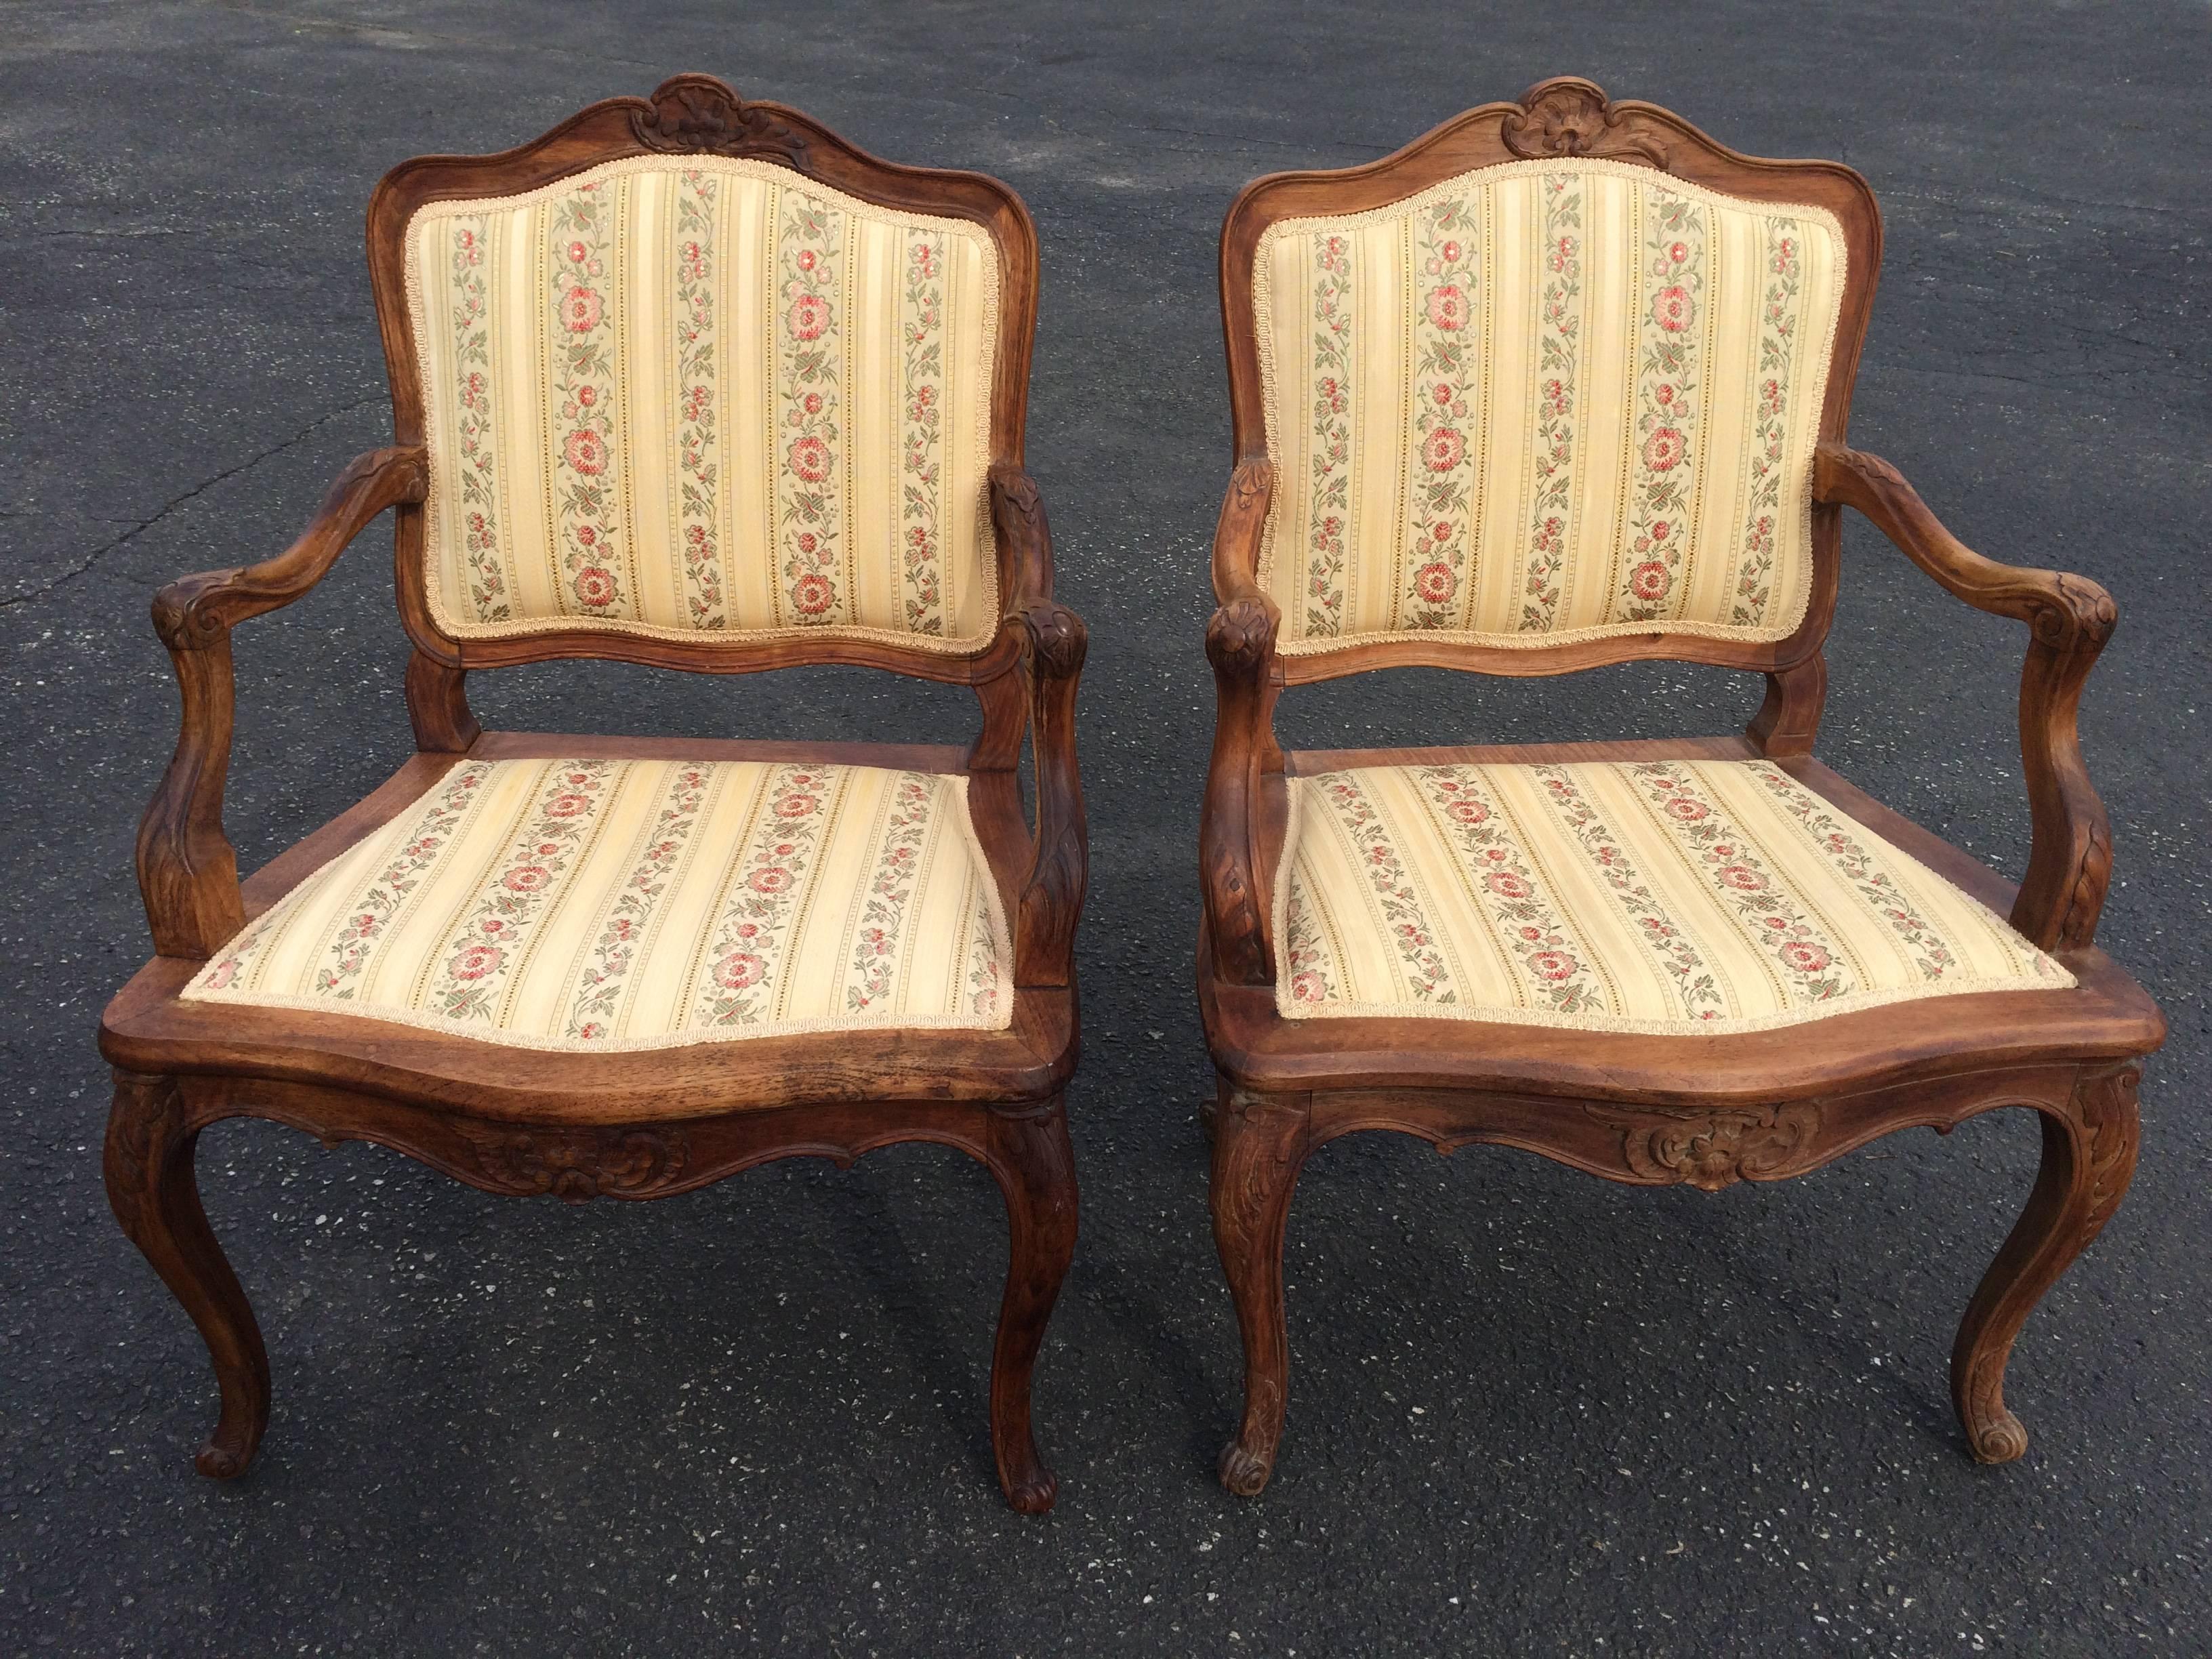 Pair of French Louis XV style armchairs. Nicely solid wooden carved pair with nice patina to the wood.
Upholstery in excellent condition. Clean and simple lines. These chairs will be a beautiful edition to any French country home. Solid sturdy